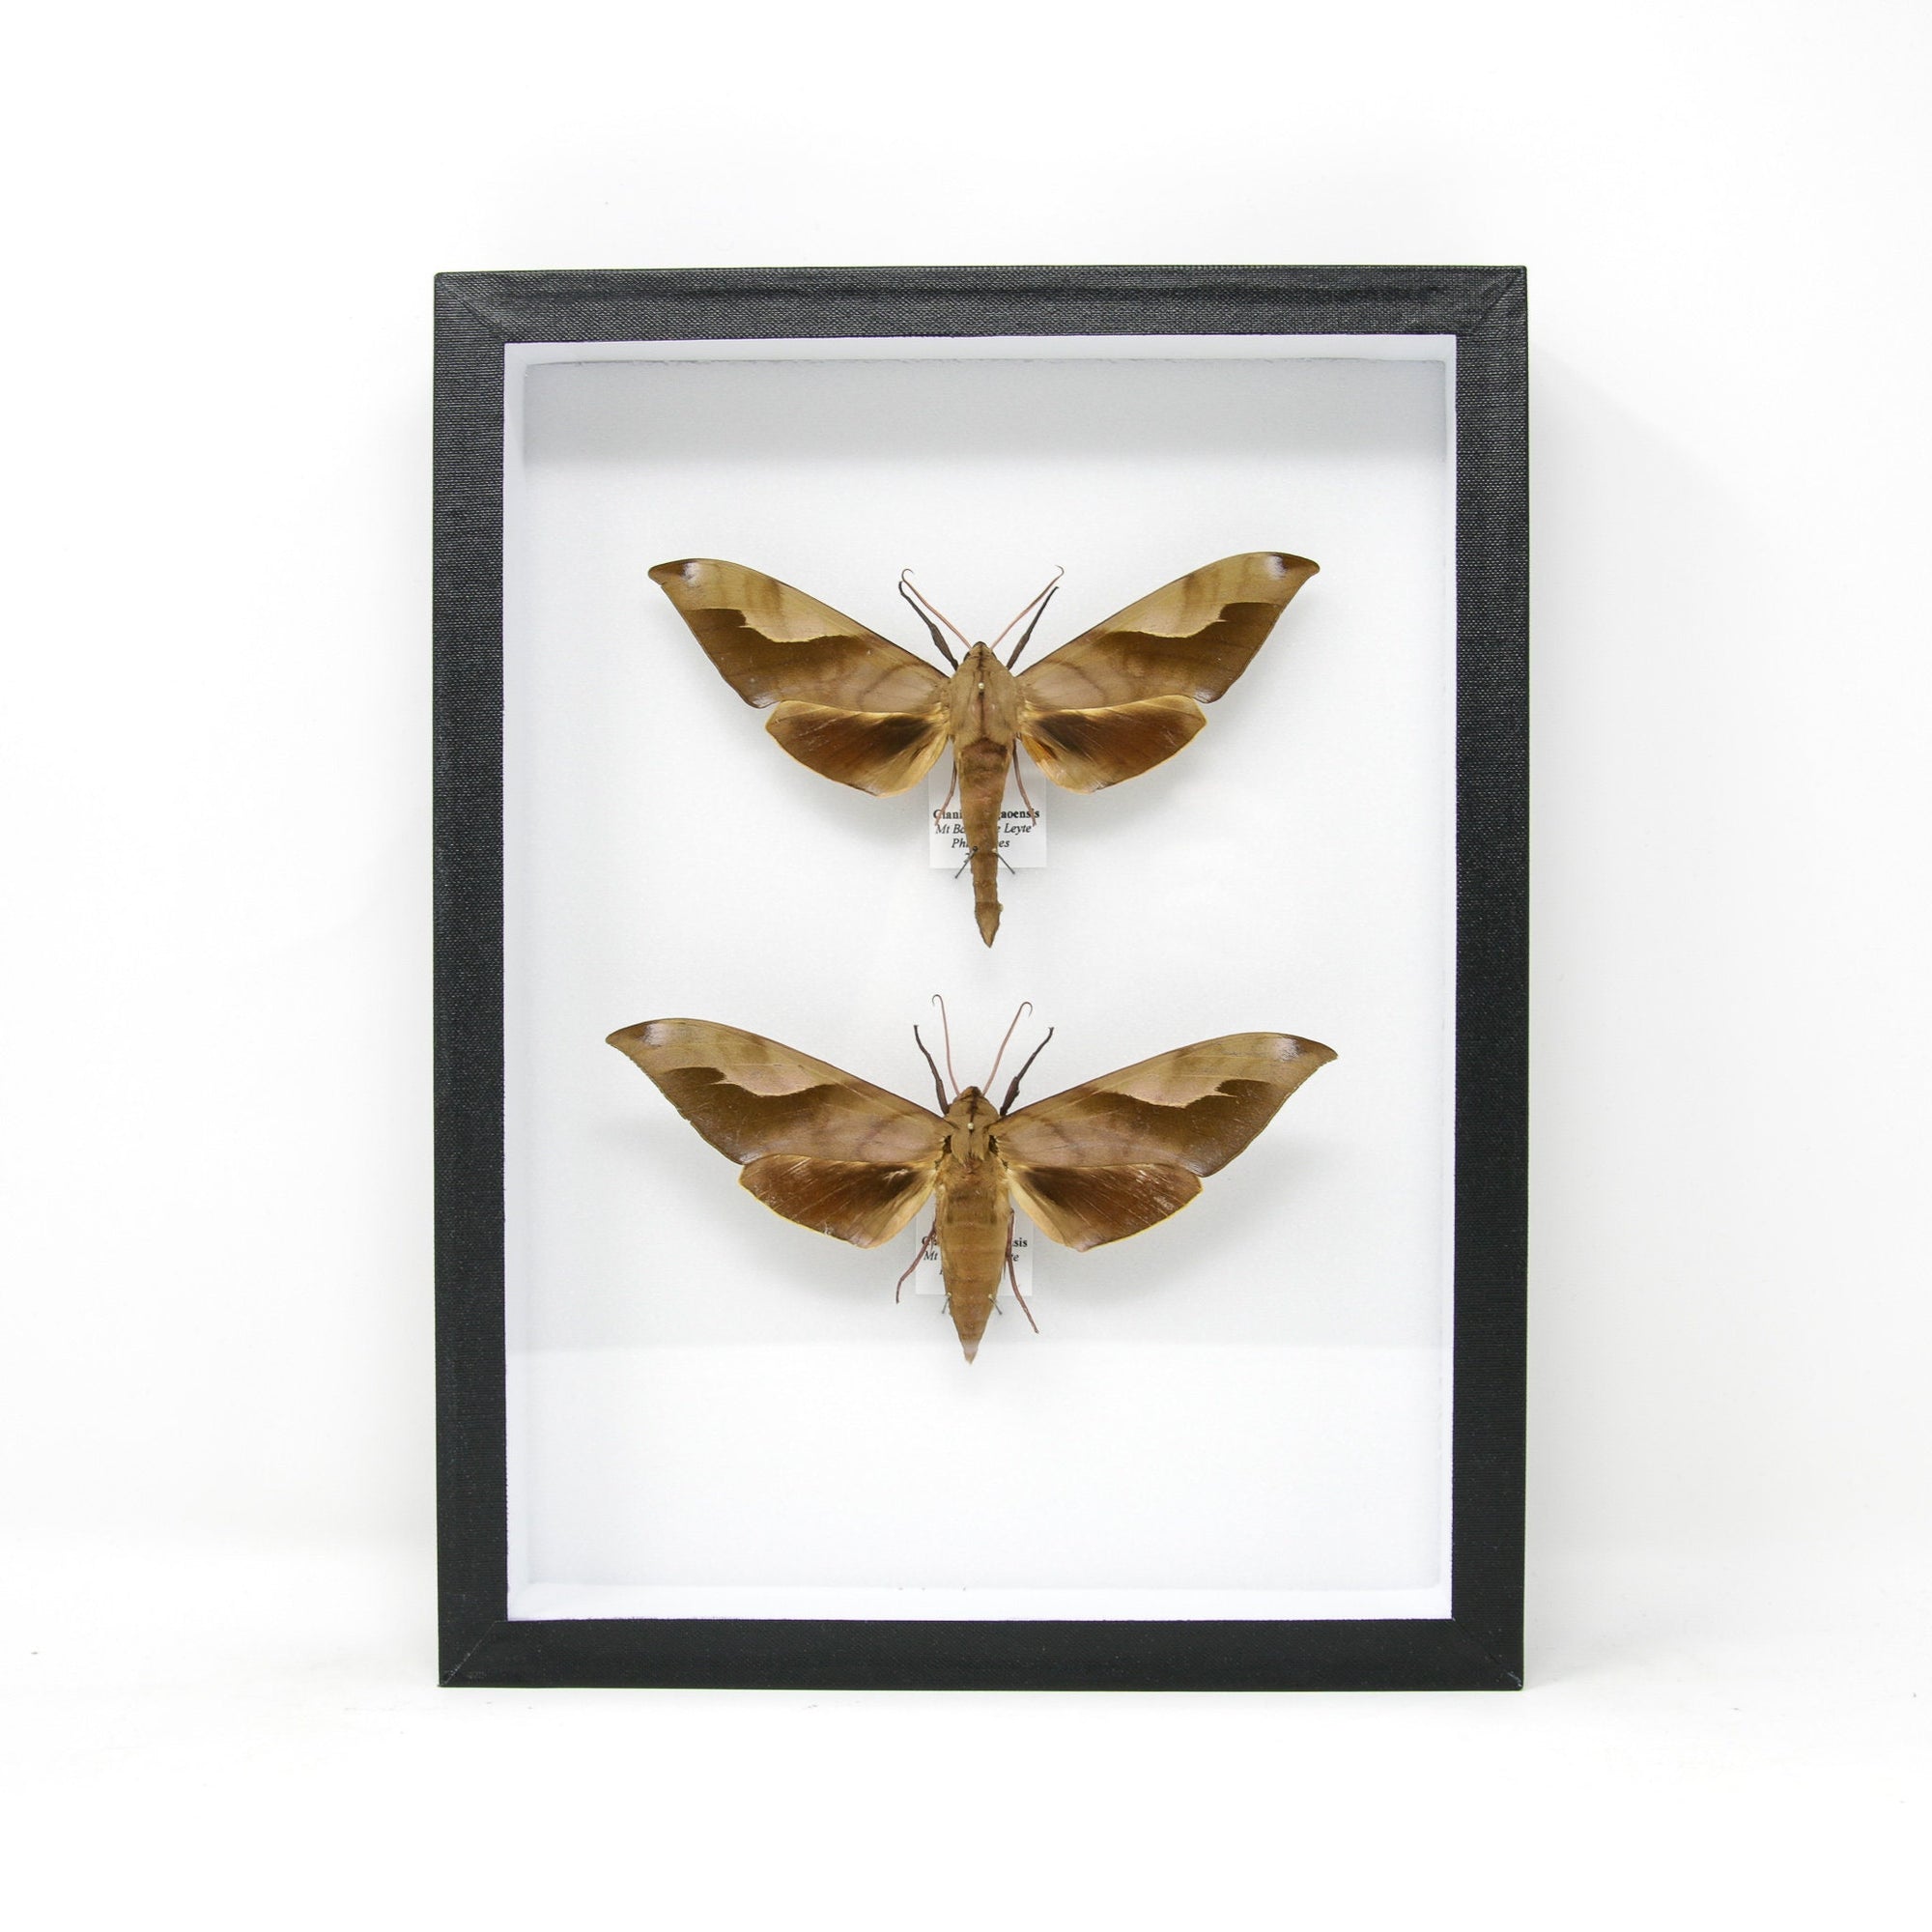 Hawkmoth Taxidermy Specimens | Clanis surigaoensis | Pinned Lepidoptera with Scientific Collection Data, Entomology Box Frame | 12x9x2 inch